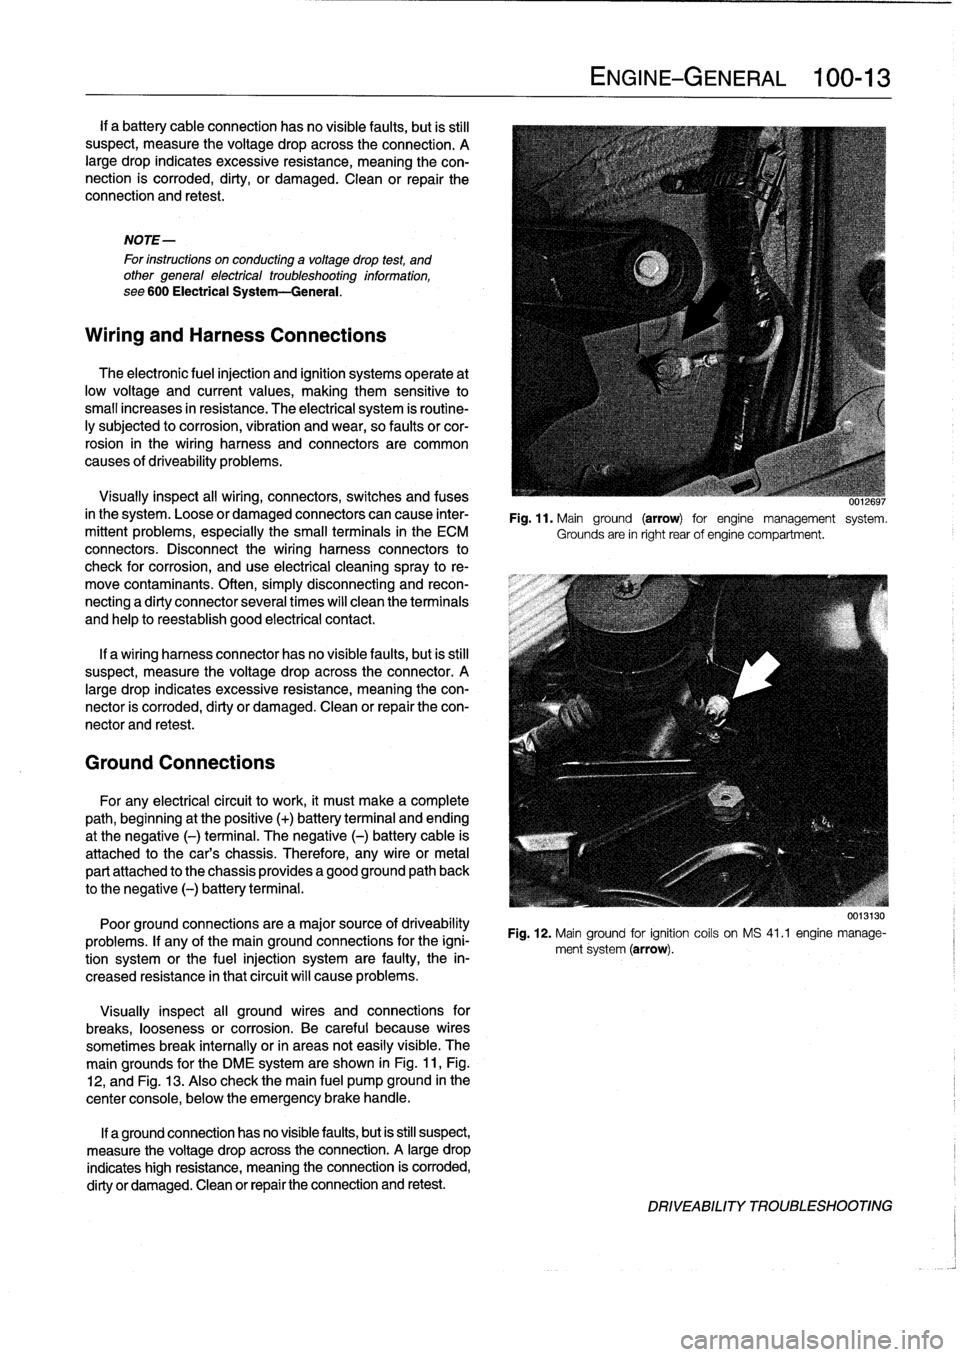 BMW 325i 1993 E36 Workshop Manual 
If
a
battery
cableconnection
hasno
visible
faults,
but
is
still
suspect,
measure
the
voltage
drop
across
the
connection
.
A
large
drop
indicates
excessive
resistance,
meaning
the
con-
nection
is
corr